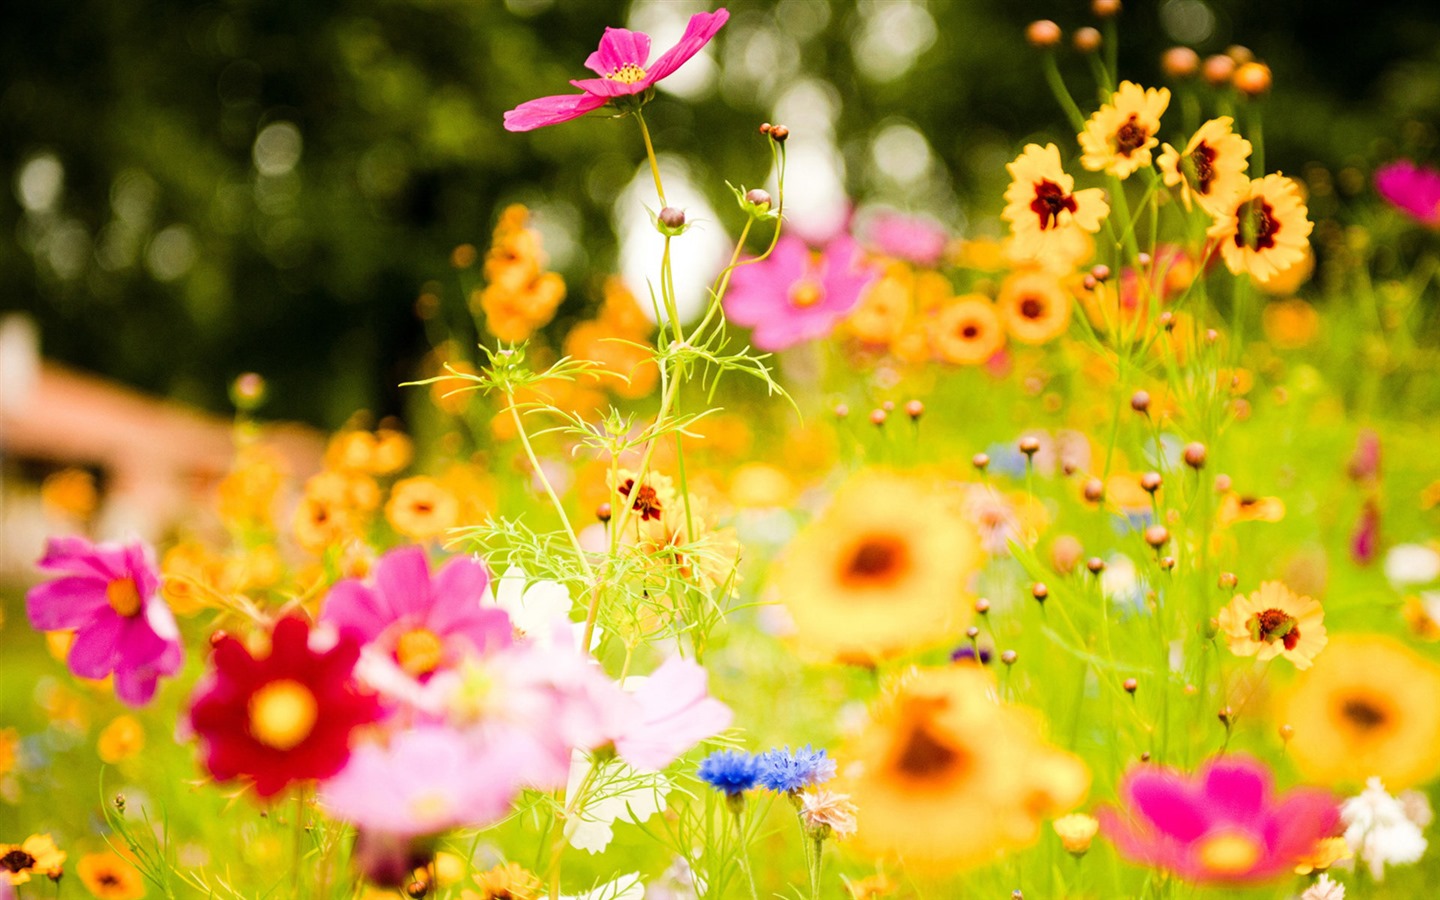 Fresh flowers and plants spring theme wallpapers #6 - 1440x900